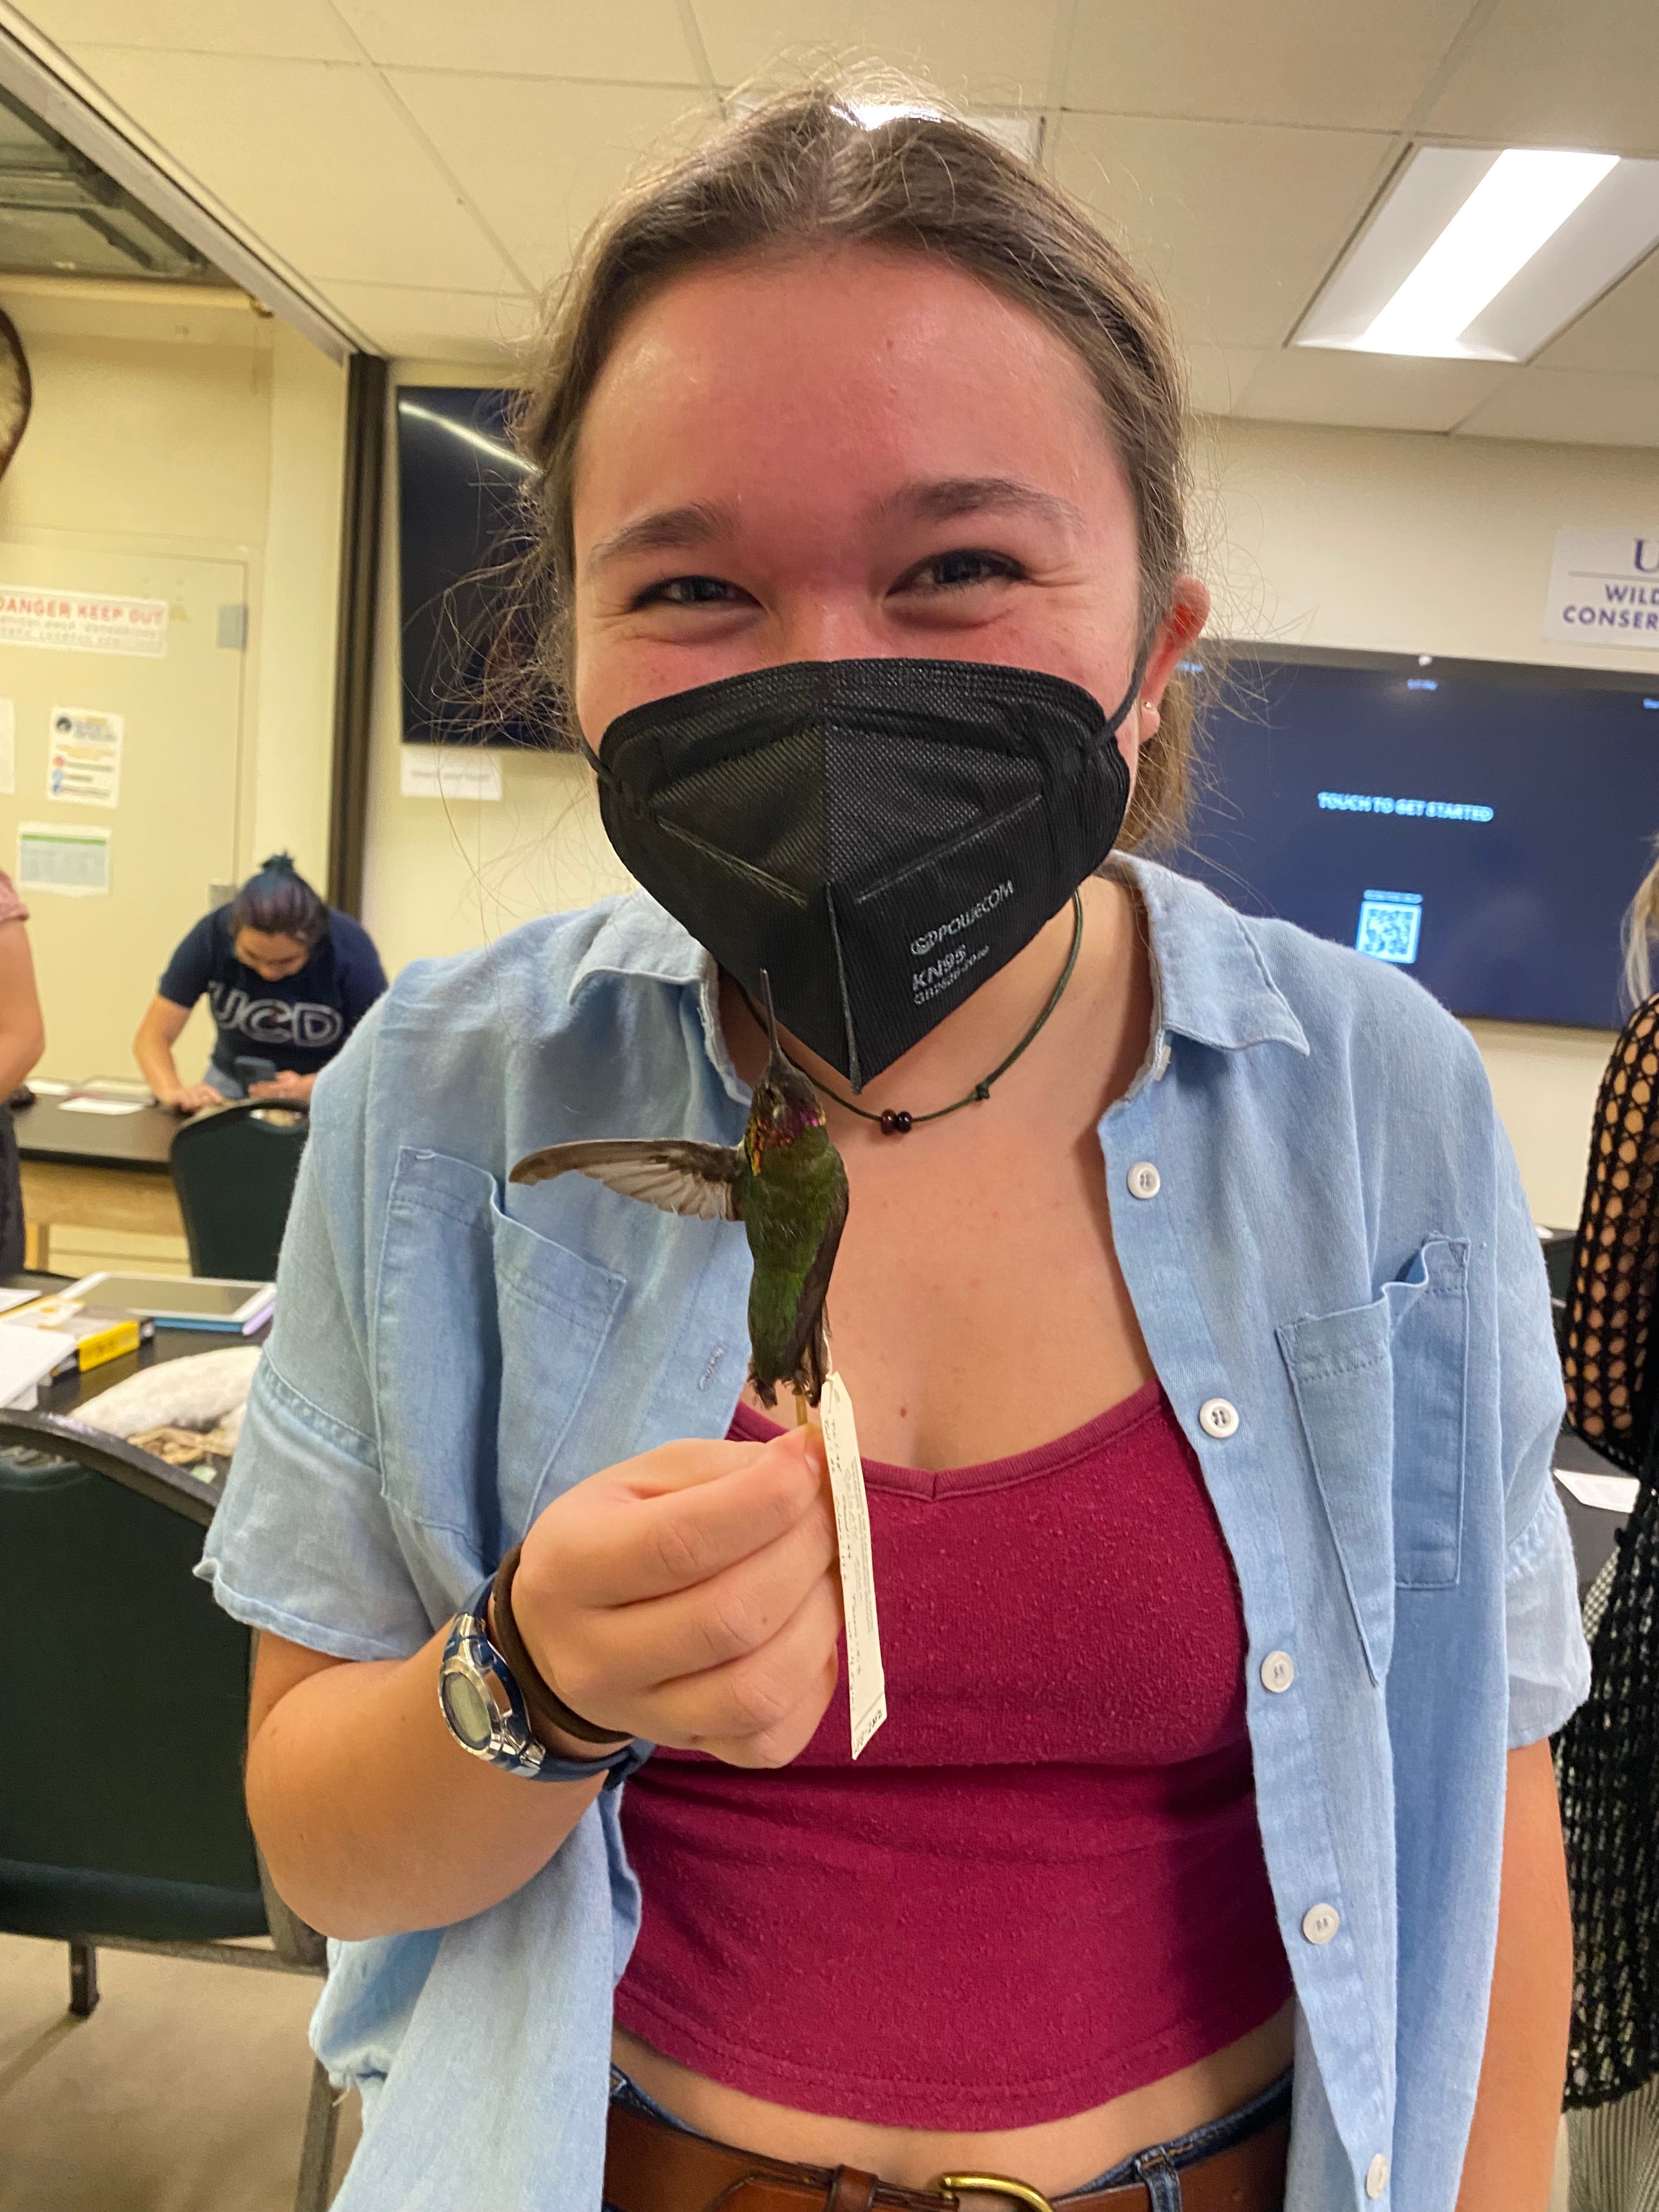 UC Davis student Malia Reiss ni mask holds preserved hummingbird during class, looking at camera